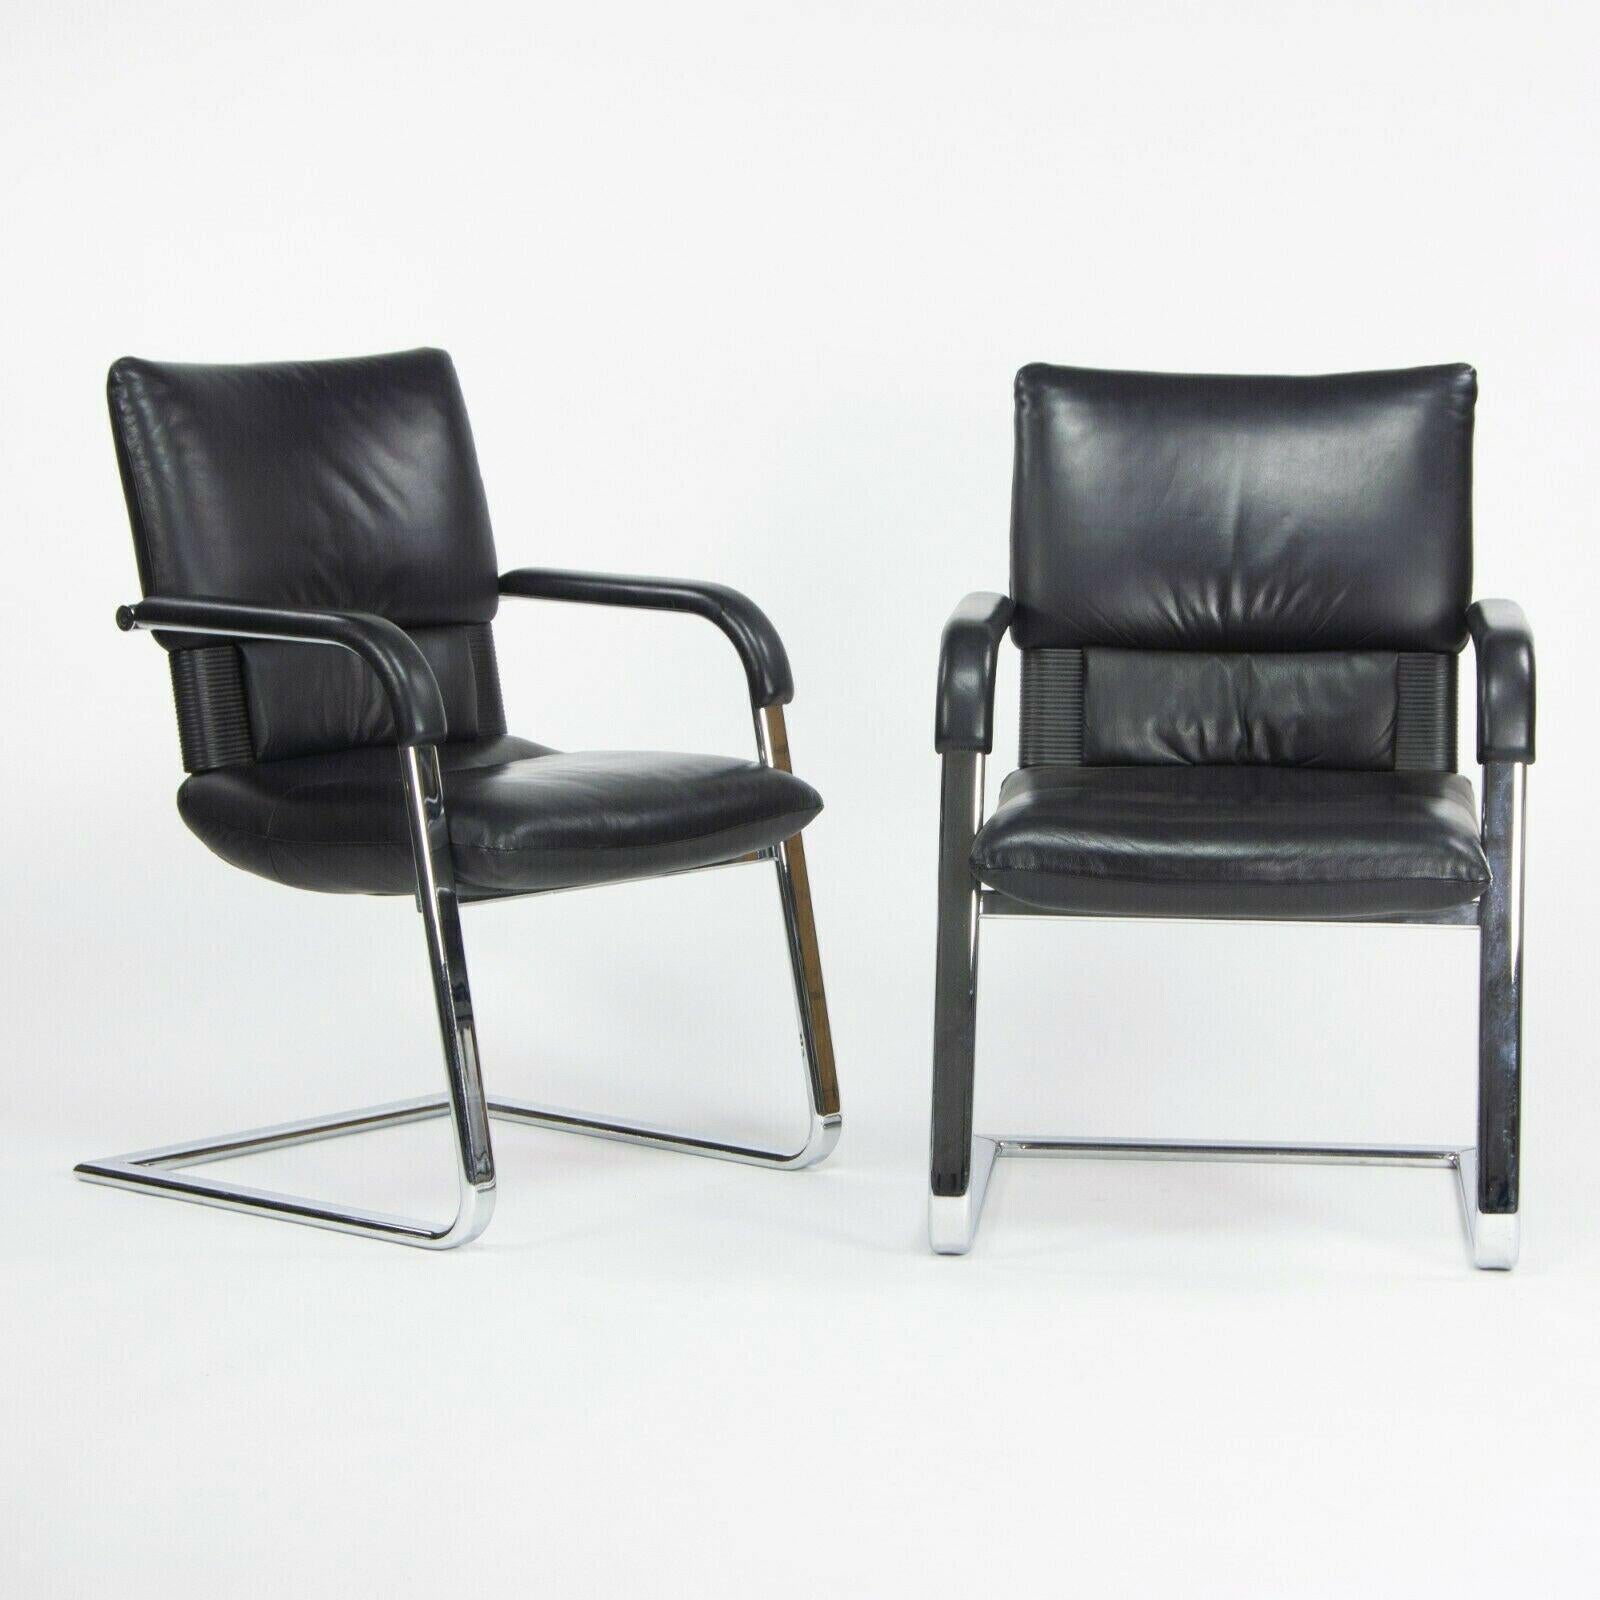 Listed for sale is a pair of vintage 1986 Vitra Figura arm chairs, designed by Mario Bellini. These are gorgeous original examples, which retain their original black leather upholstery. The chairs were likely used a side chairs in an executive